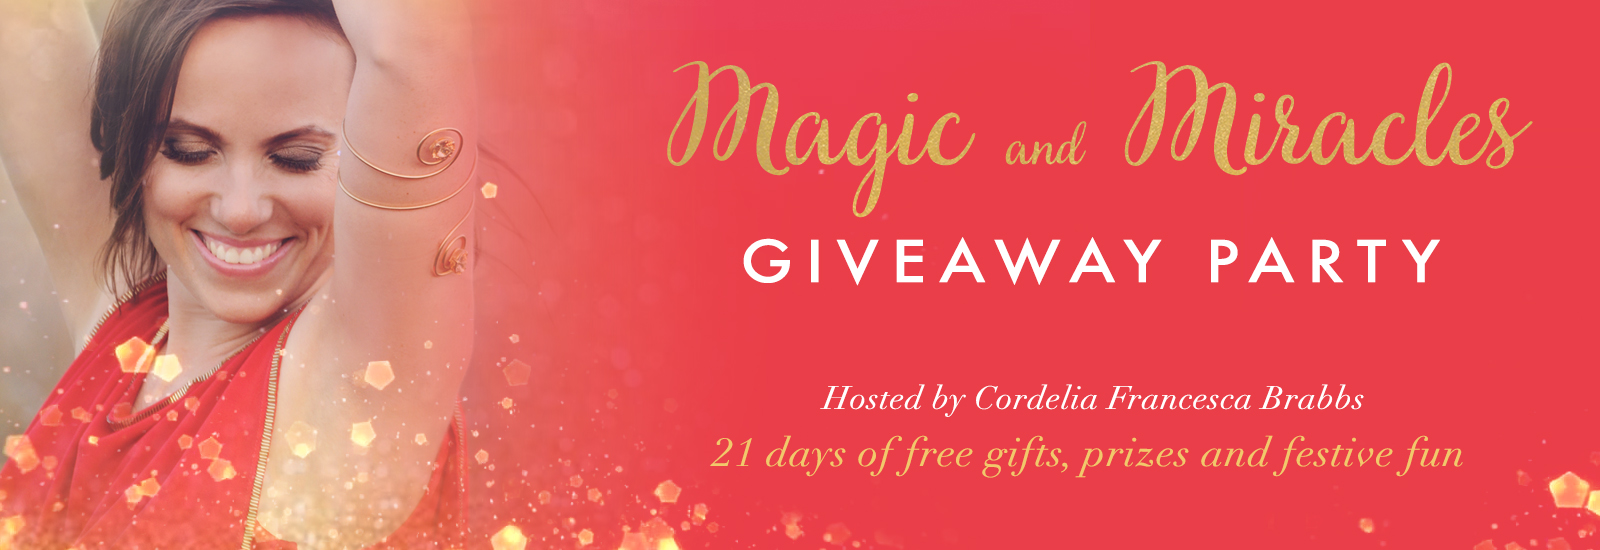 magic and Miracles Giveaway party